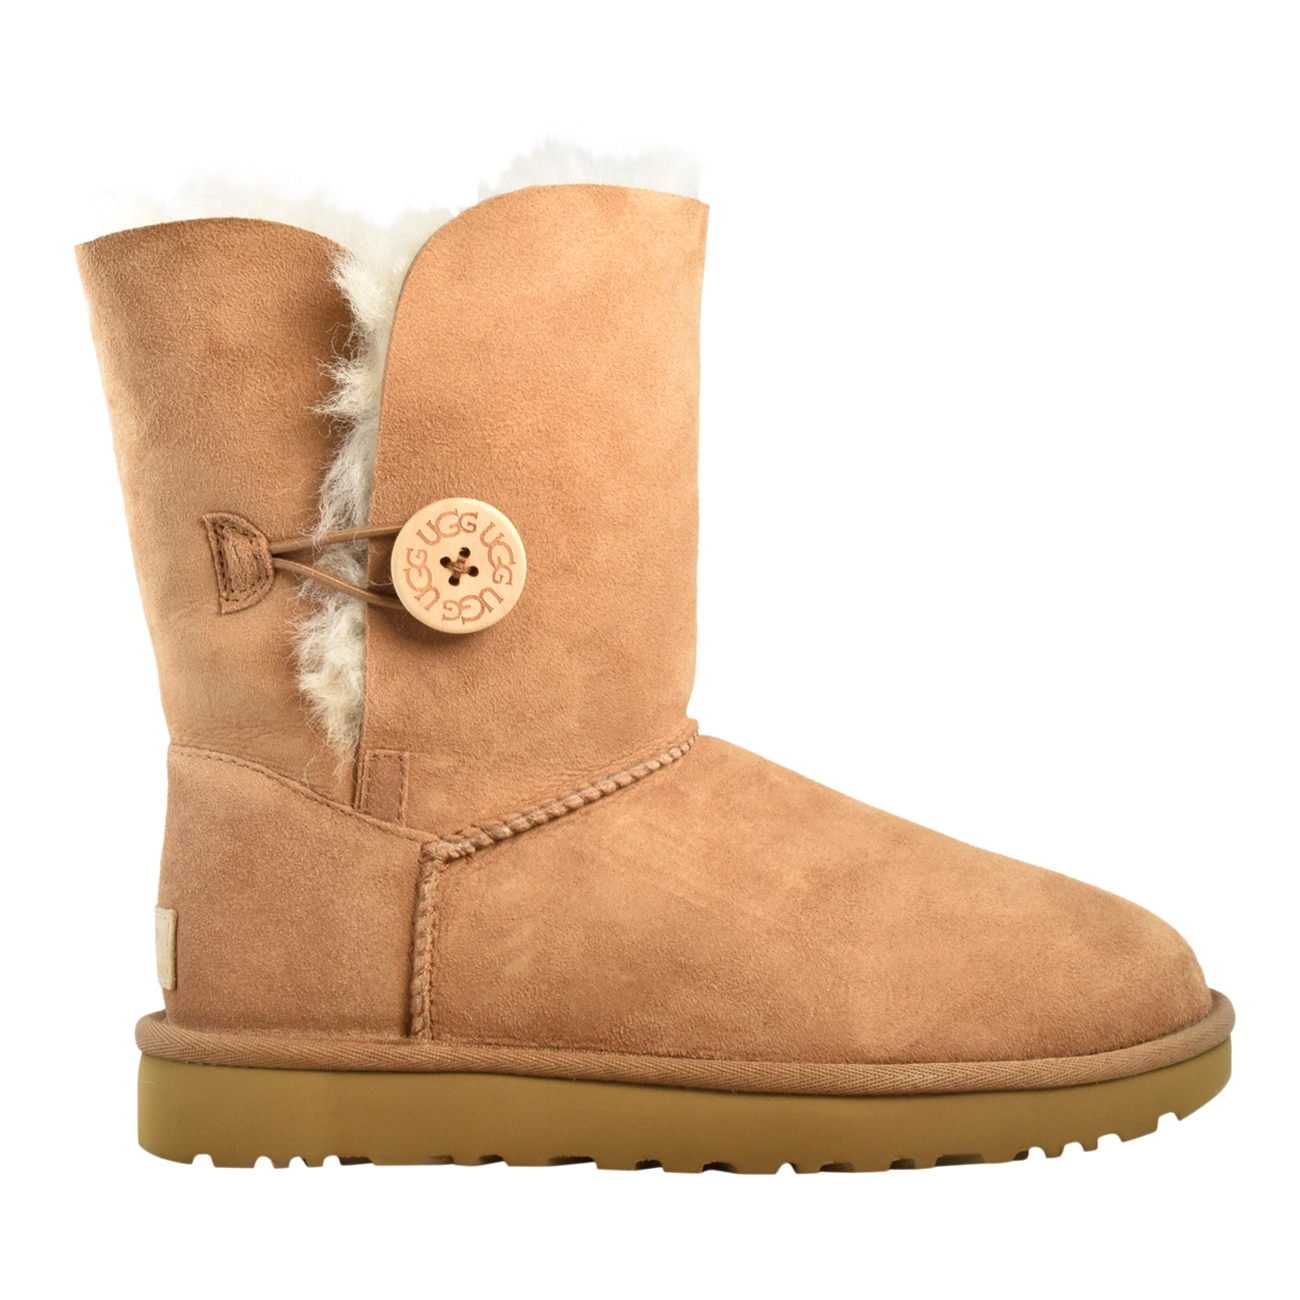 how to fix bailey button uggs from folding over